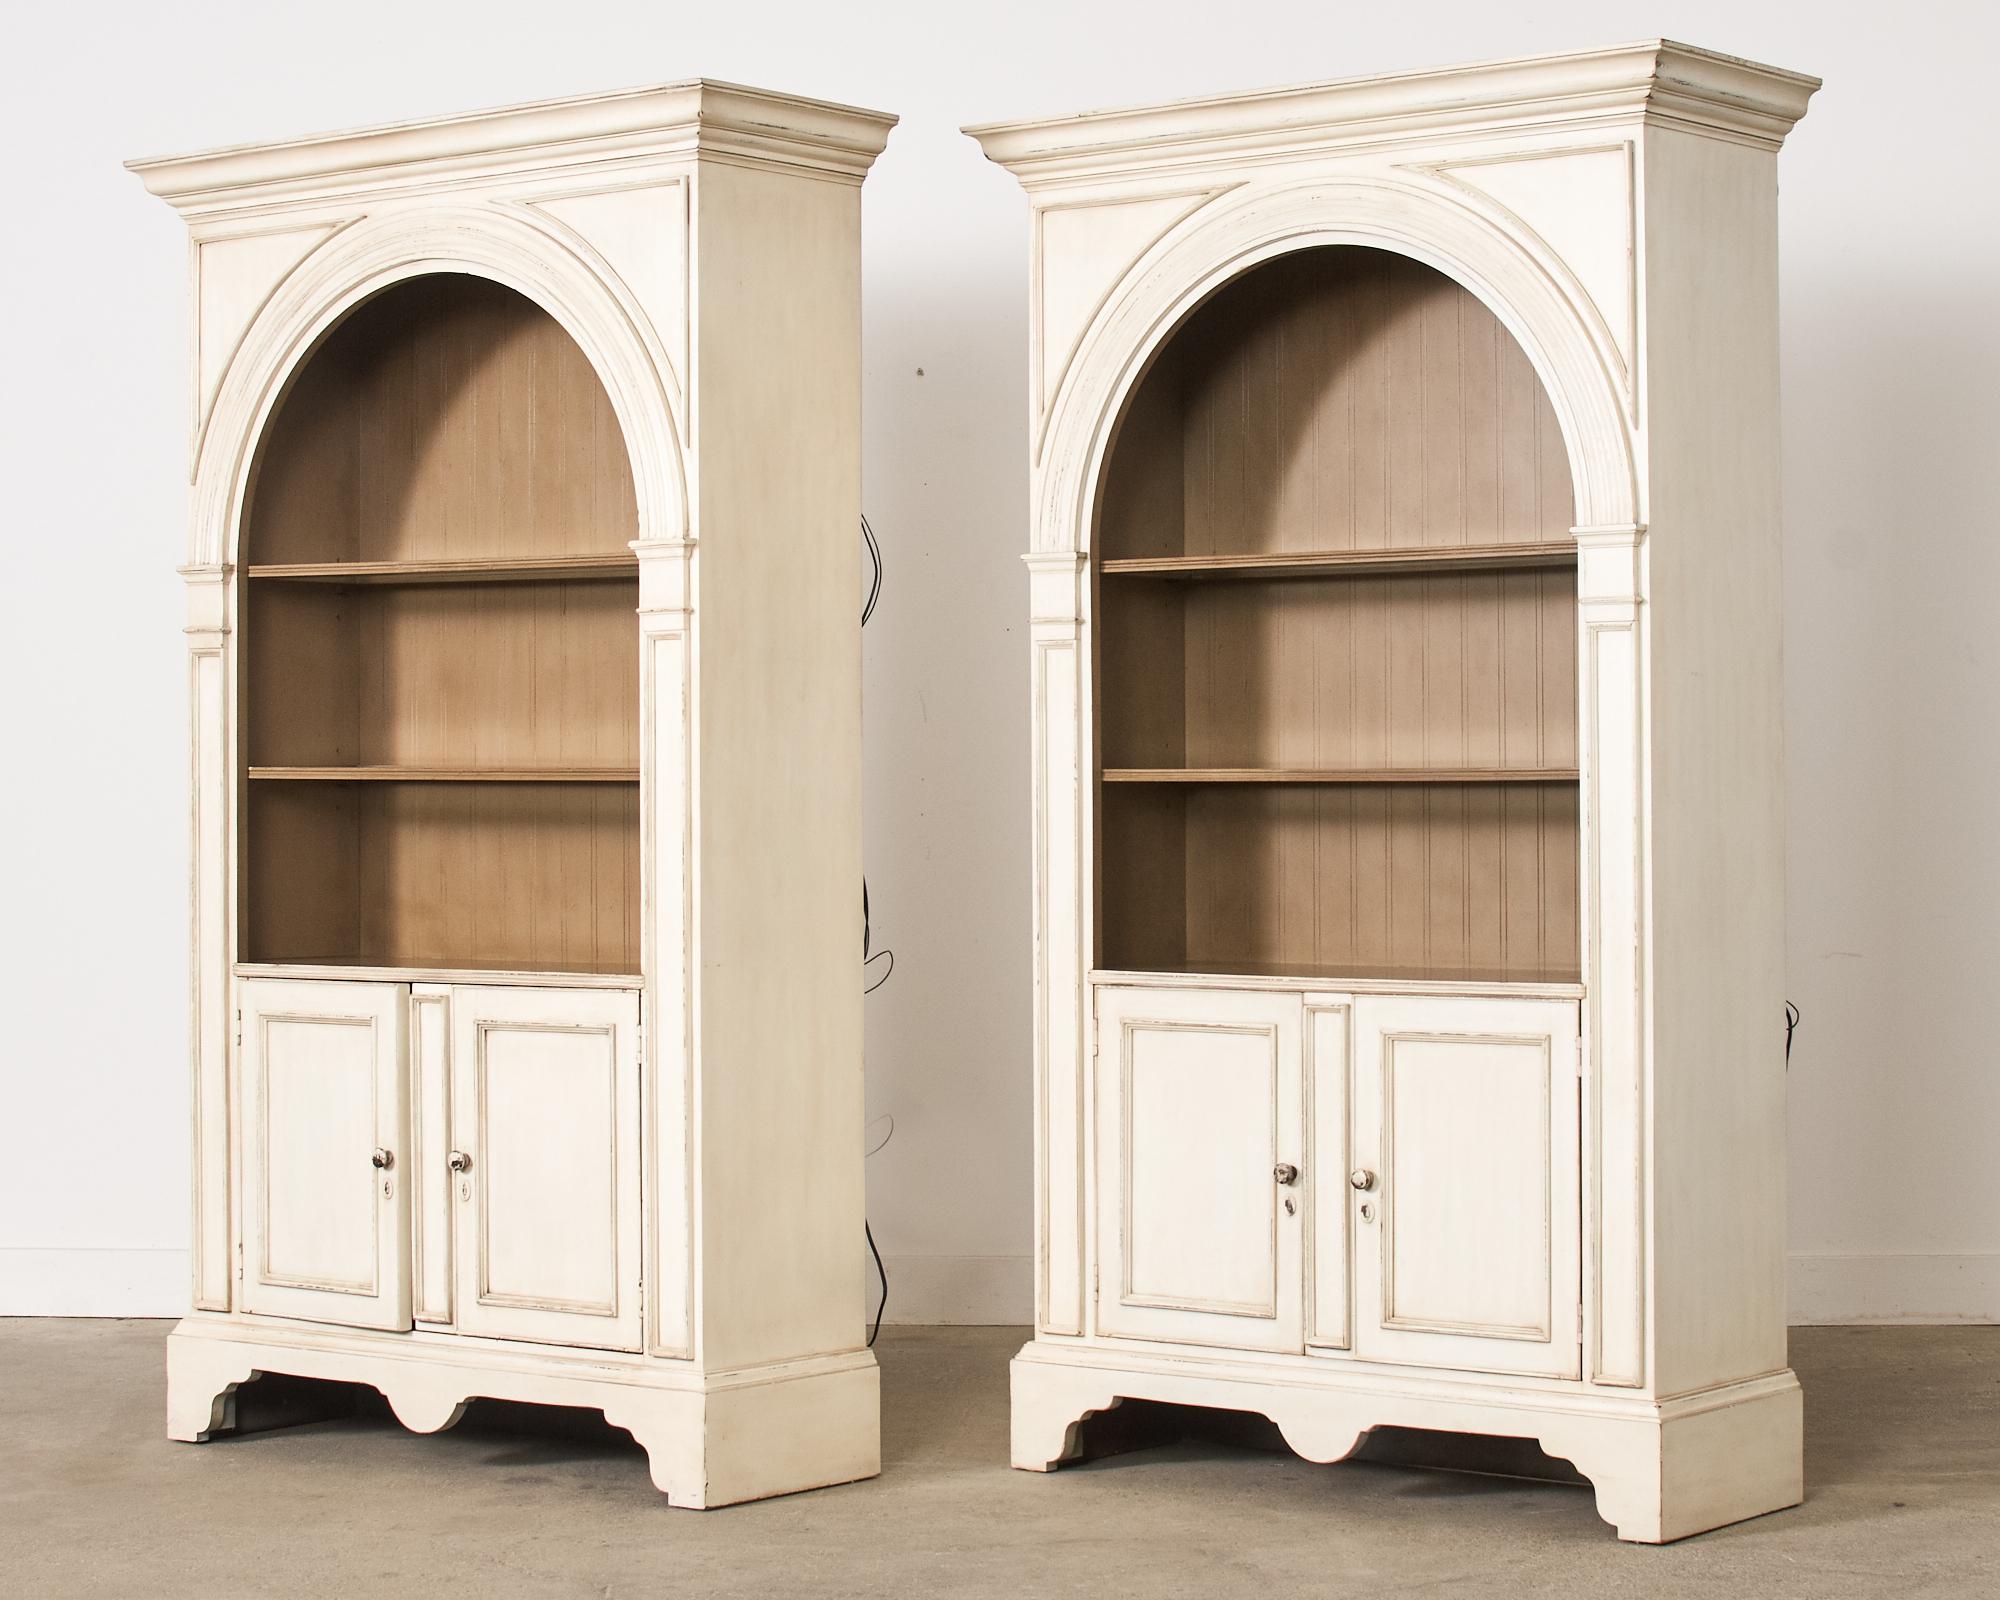 Grand pair of architectural painted library bookcases or display cabinets hand-crafted by Baker. Each large cabinet has an arched opening surmounted by a corniced top. The cases have a fitted three glass shelf interior that is lighted. Below the